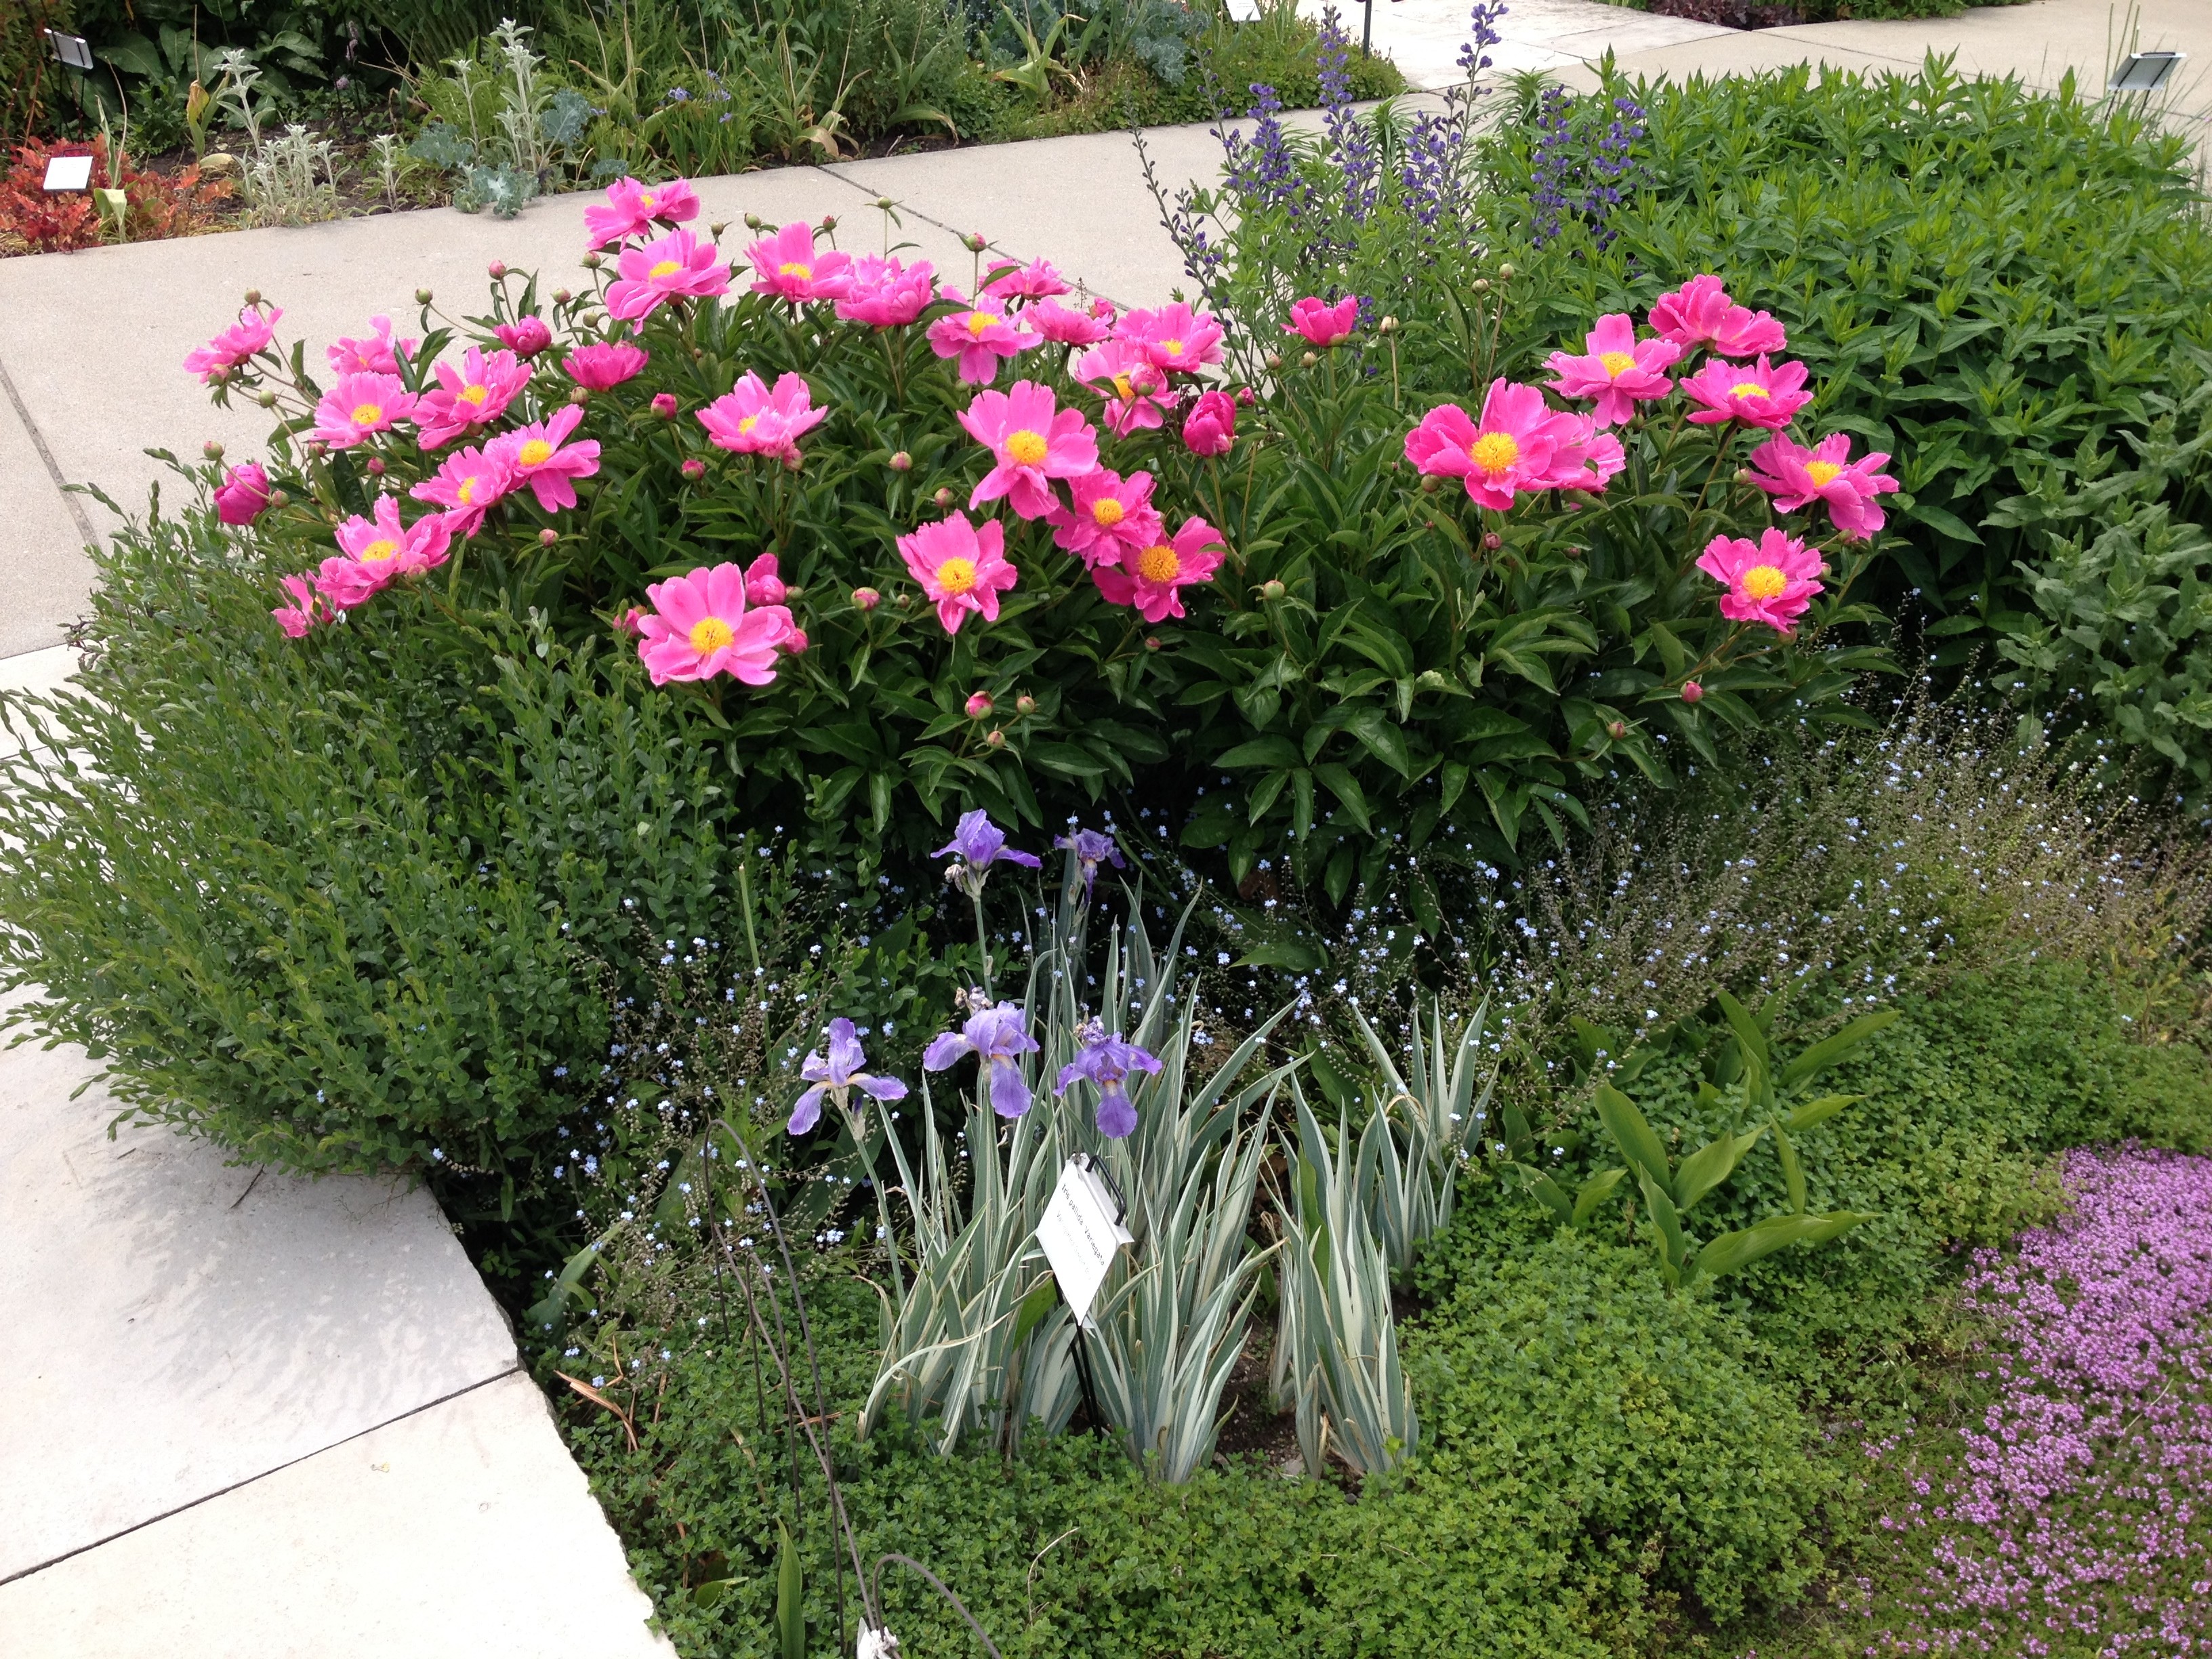 Flowers by a path | Oakville News